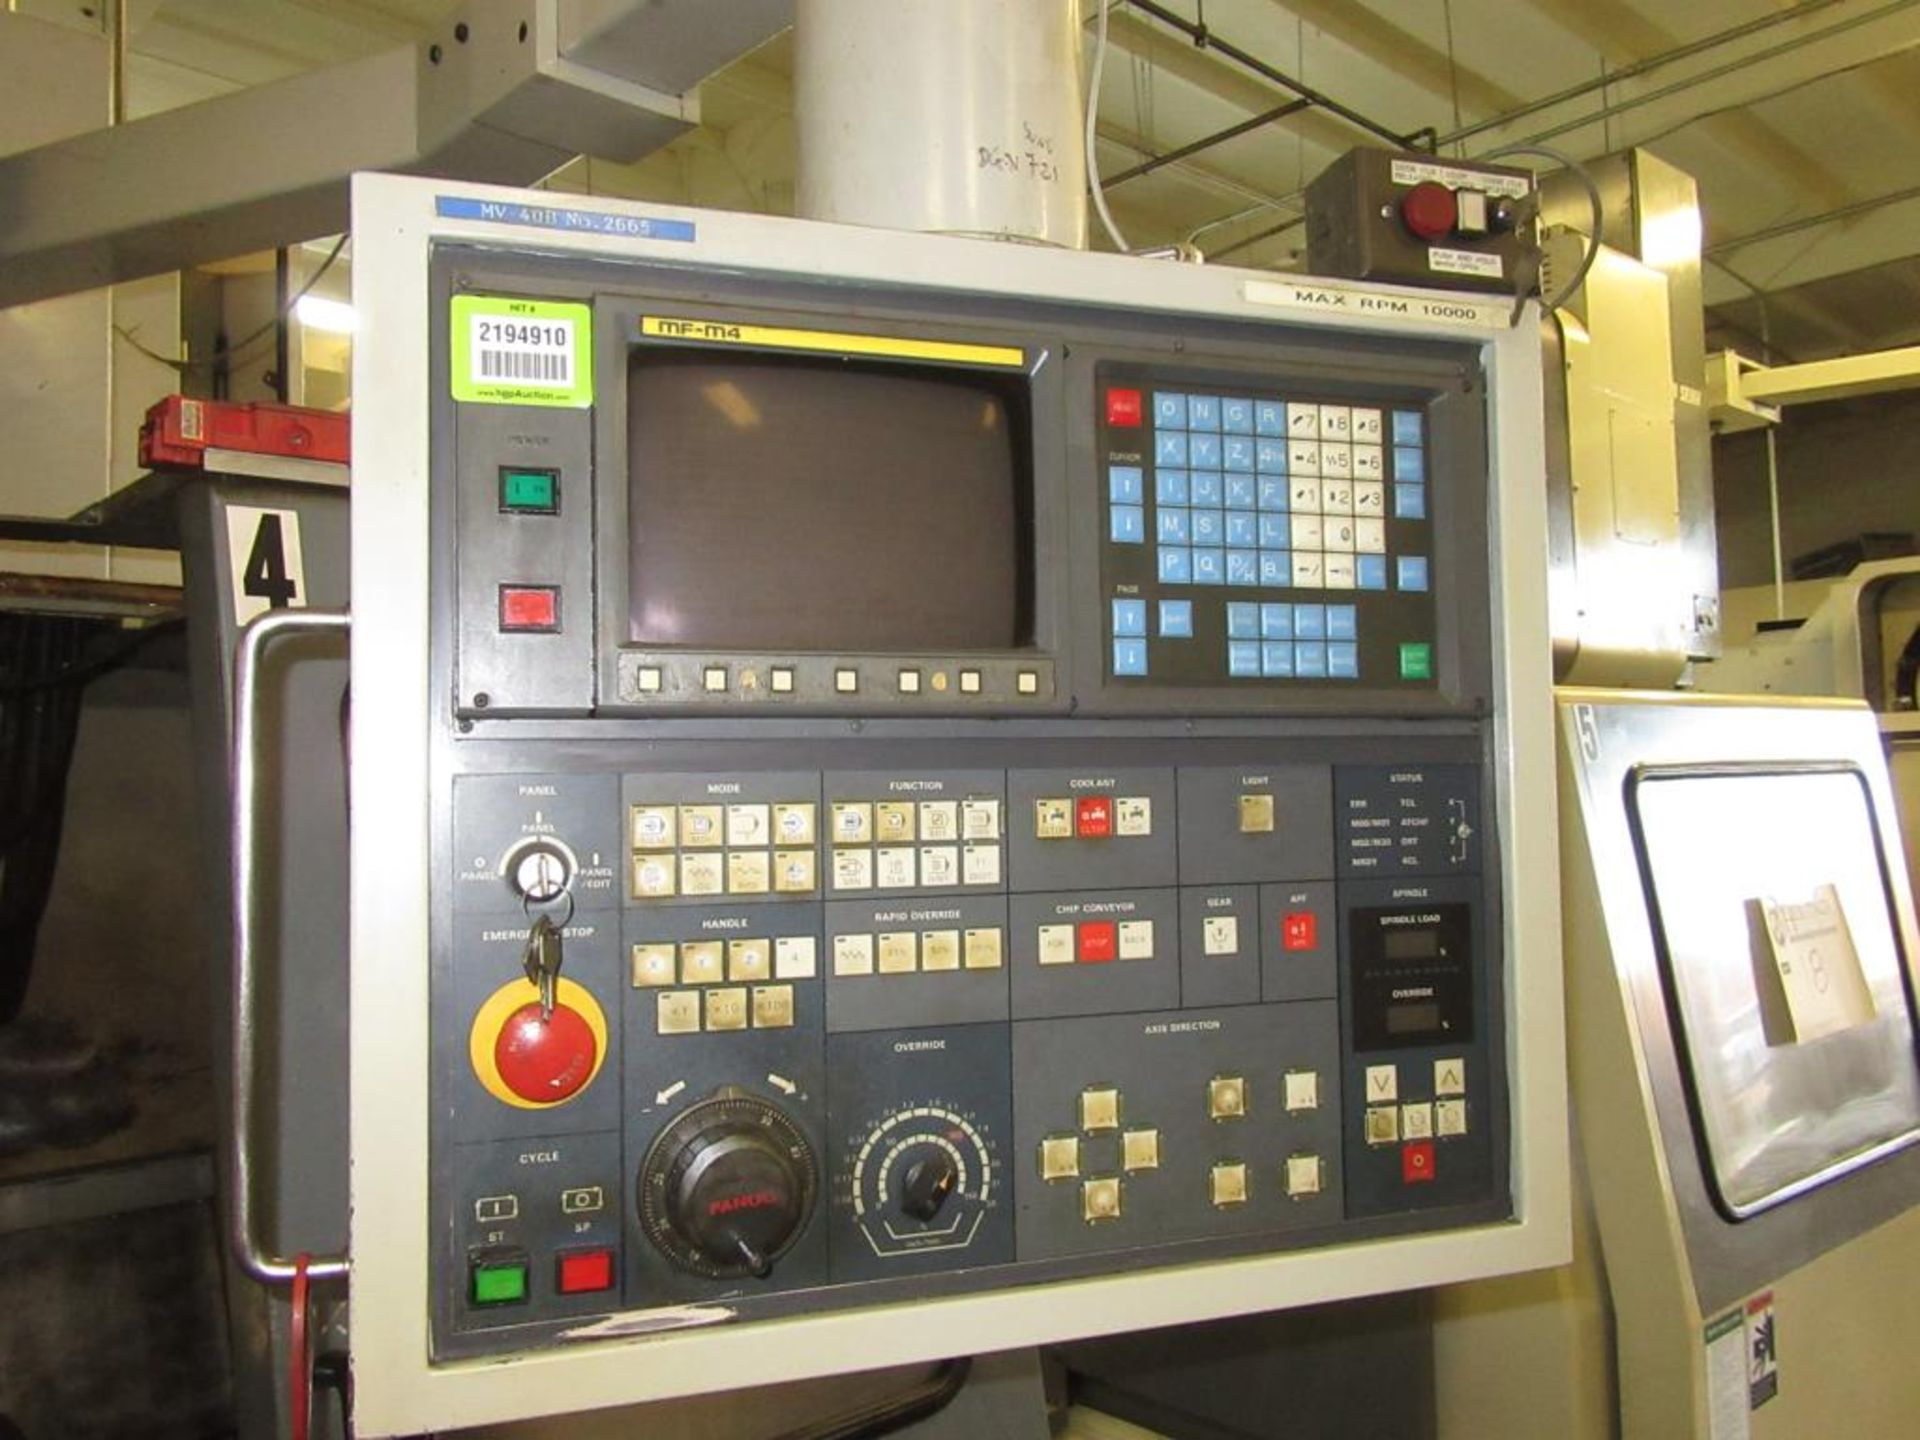 Mori Seiki MV-40B 1990 - CNC Vertical Machining Center with MF-M4 3-Axis Control Panel, Table Size - Image 3 of 10